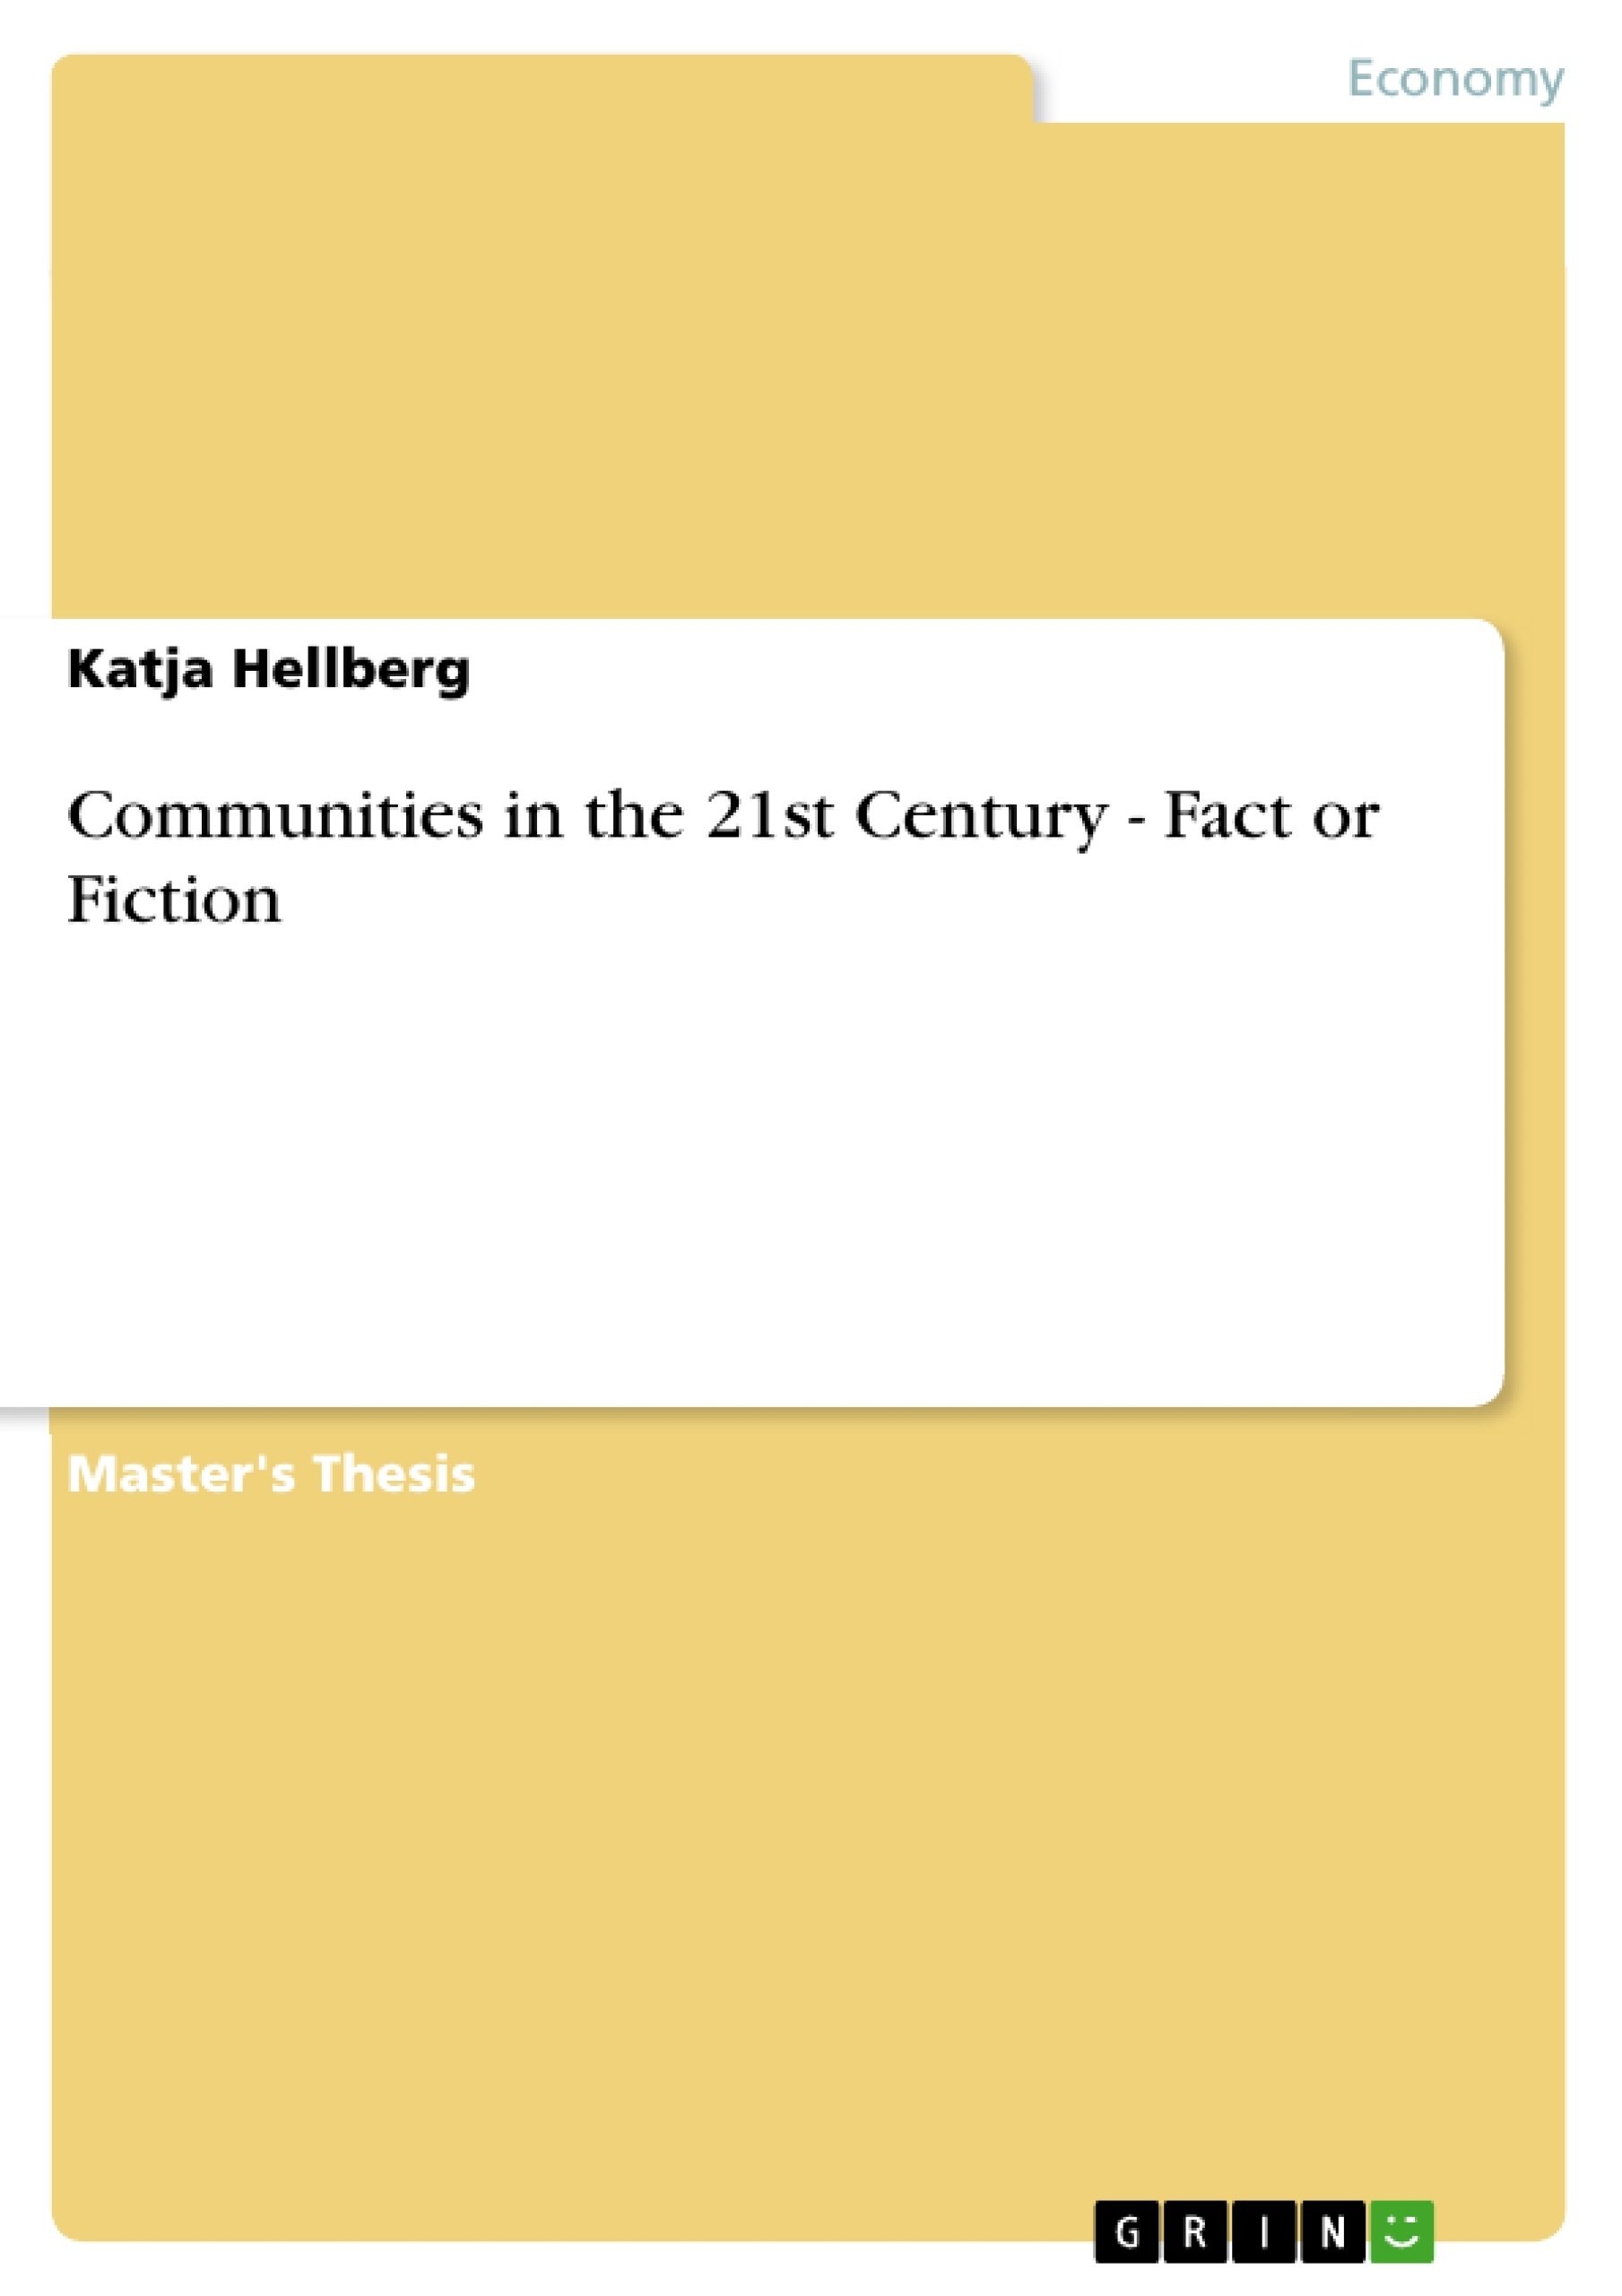 Title: Communities in the 21st Century - Fact or Fiction